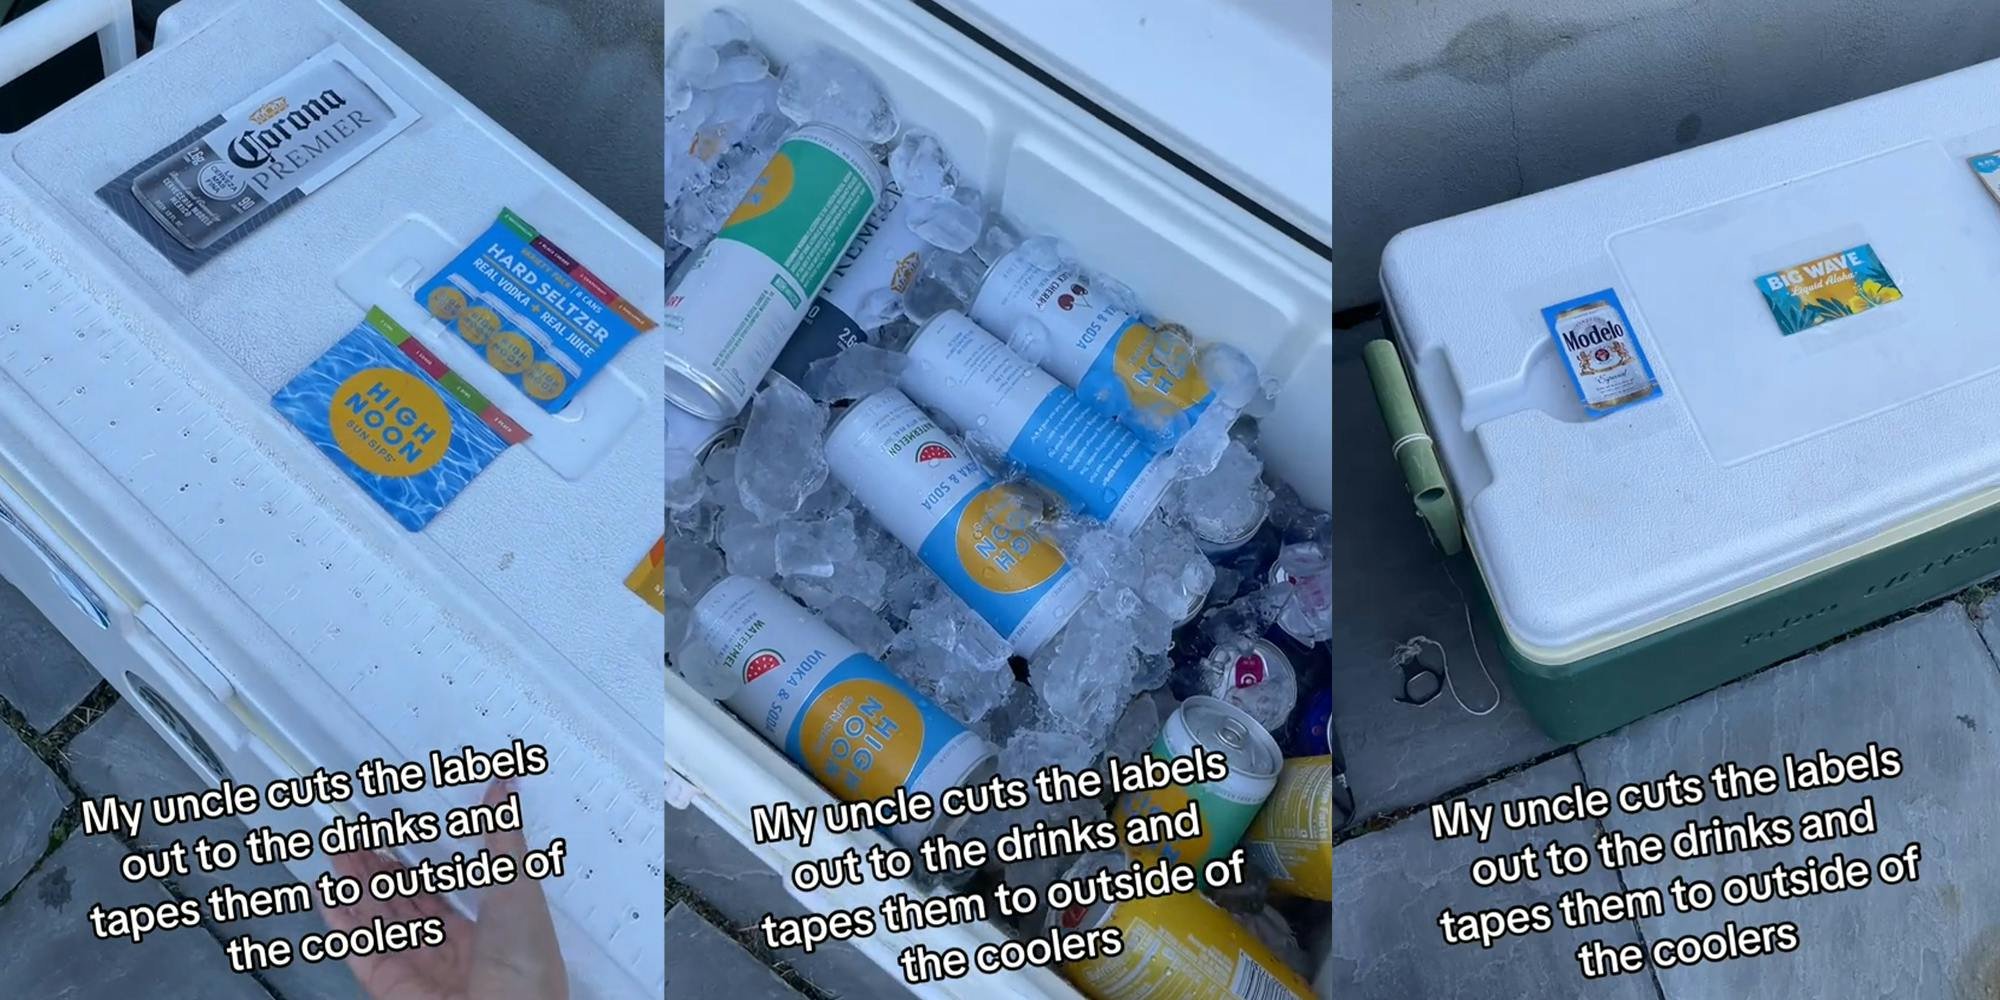 'How have I never thought of this': Uncle Cuts Out Modelo, Coke, and Sprite Labels in 'Genius' Cooler Hack